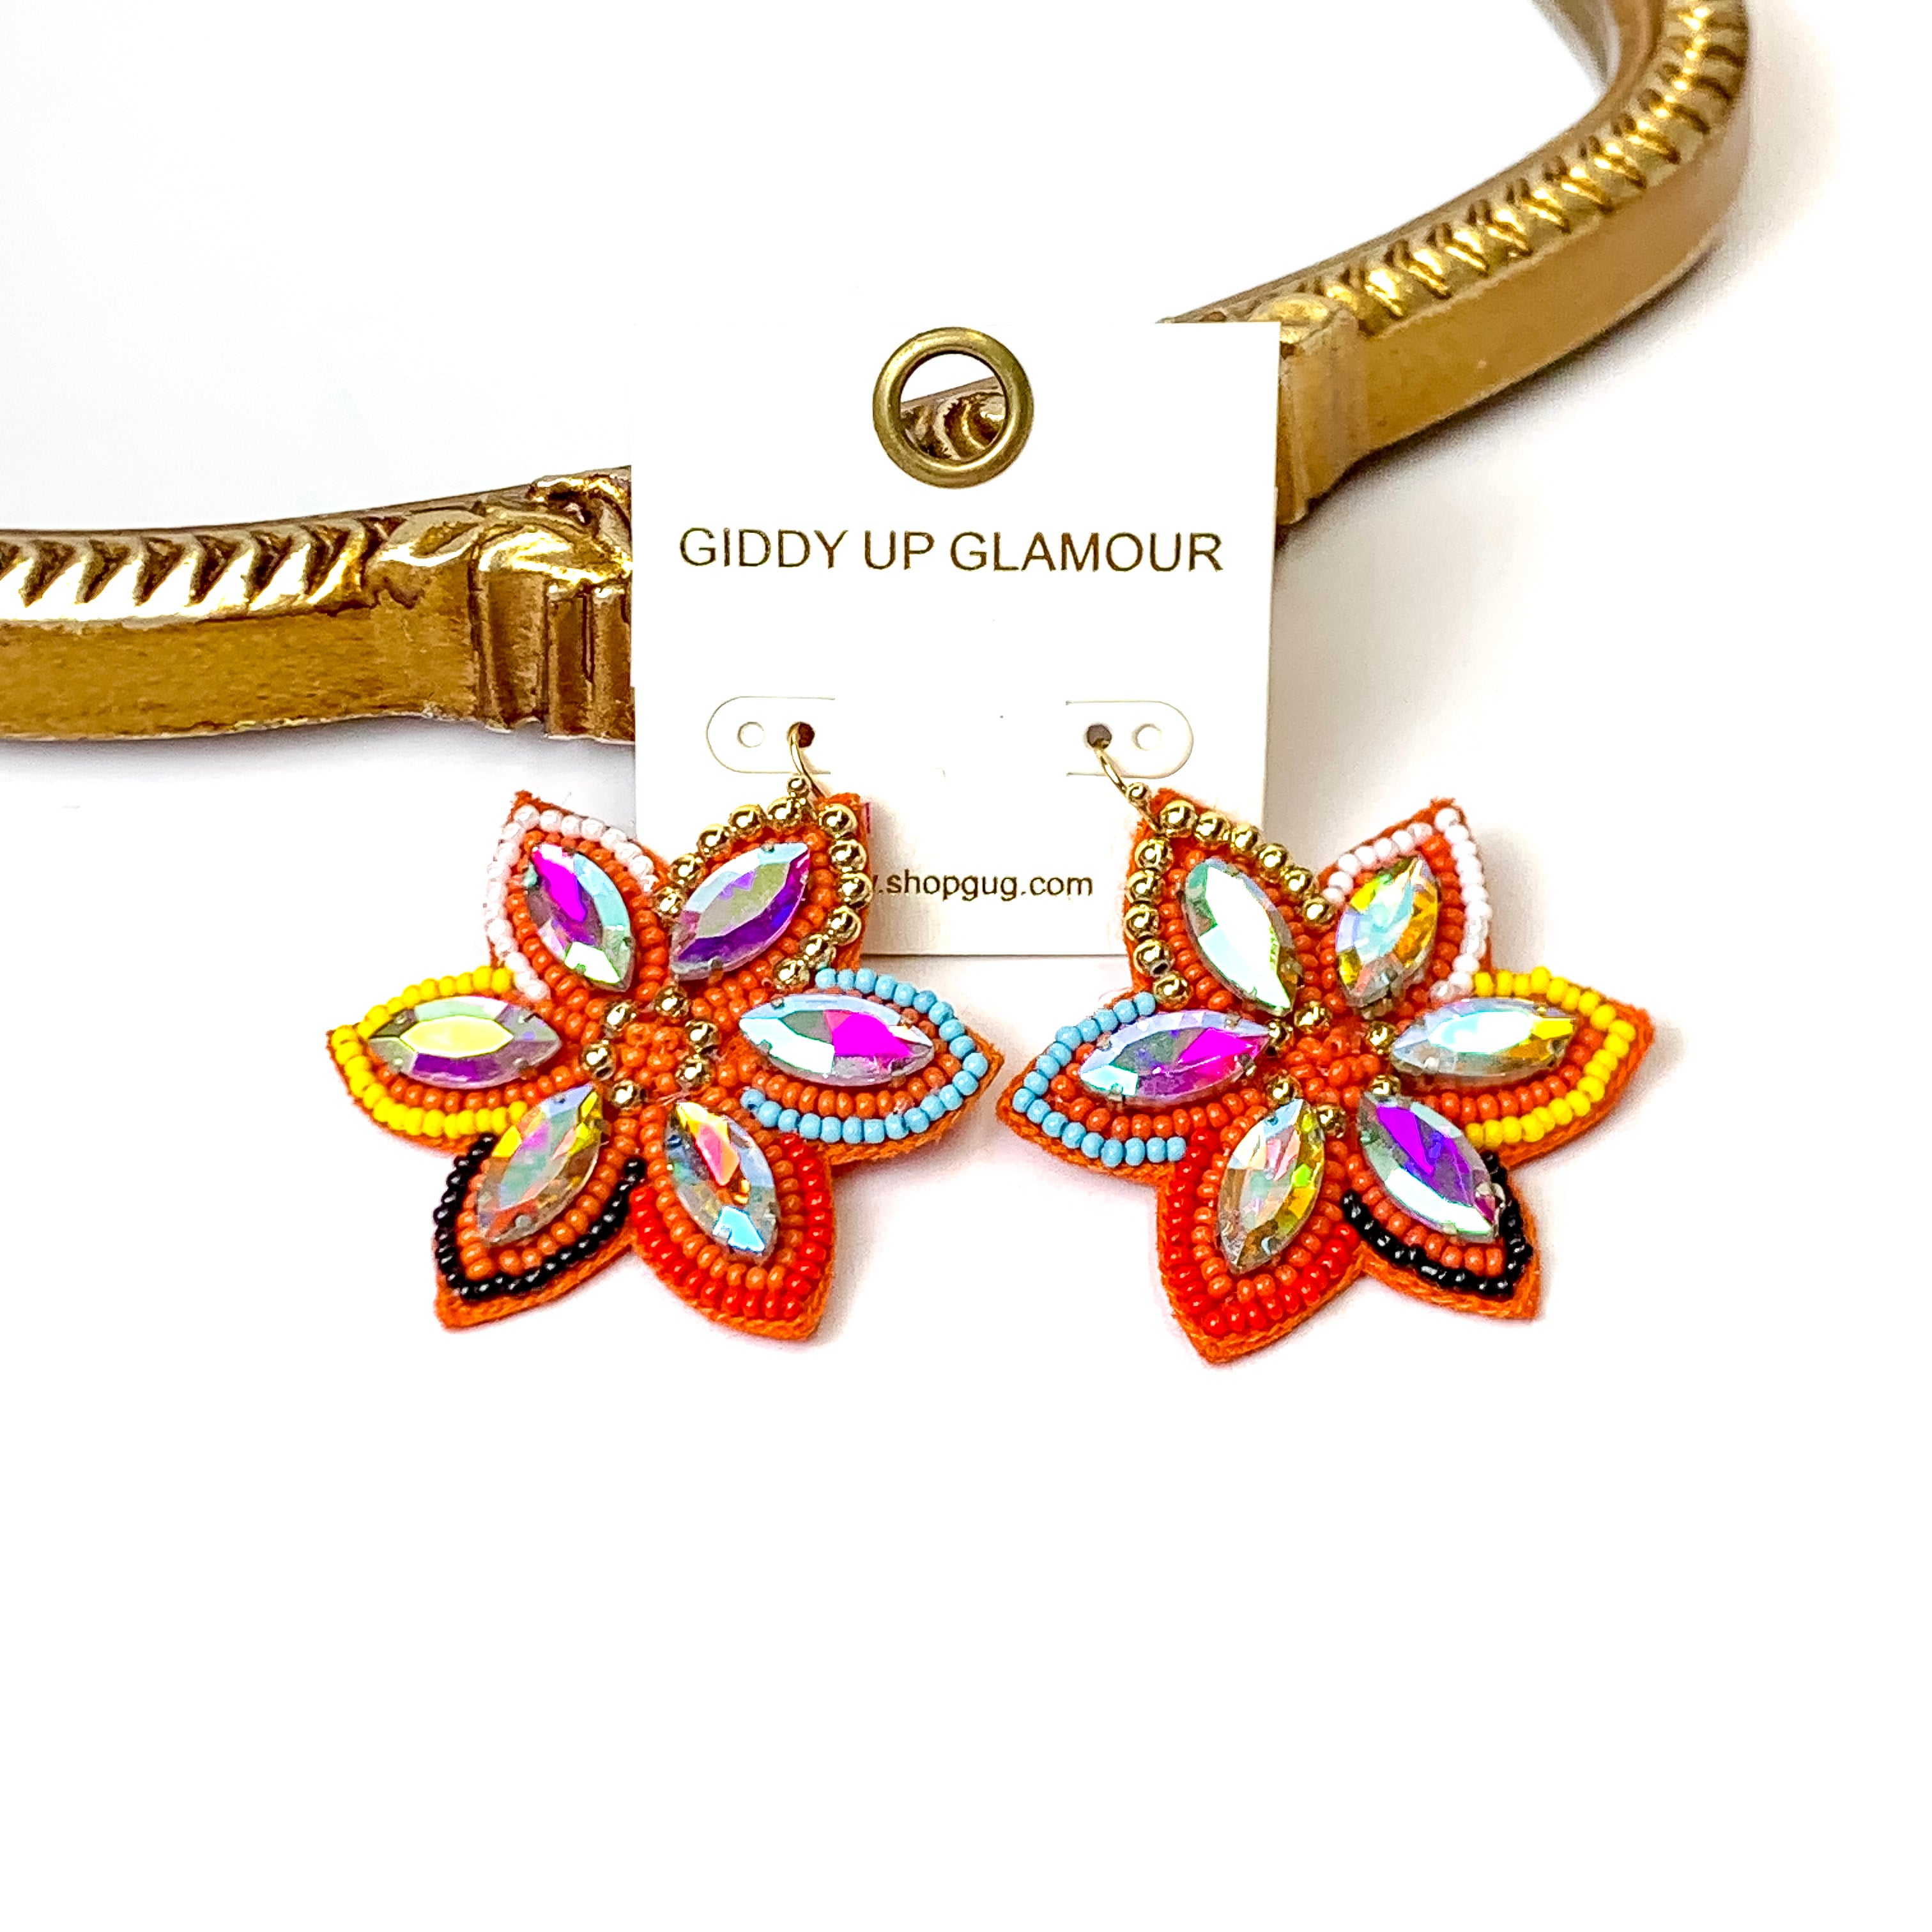 Desert Daisy Multicolored Flower Shaped Earrings with AB Crystal Accents in Red - Giddy Up Glamour Boutique